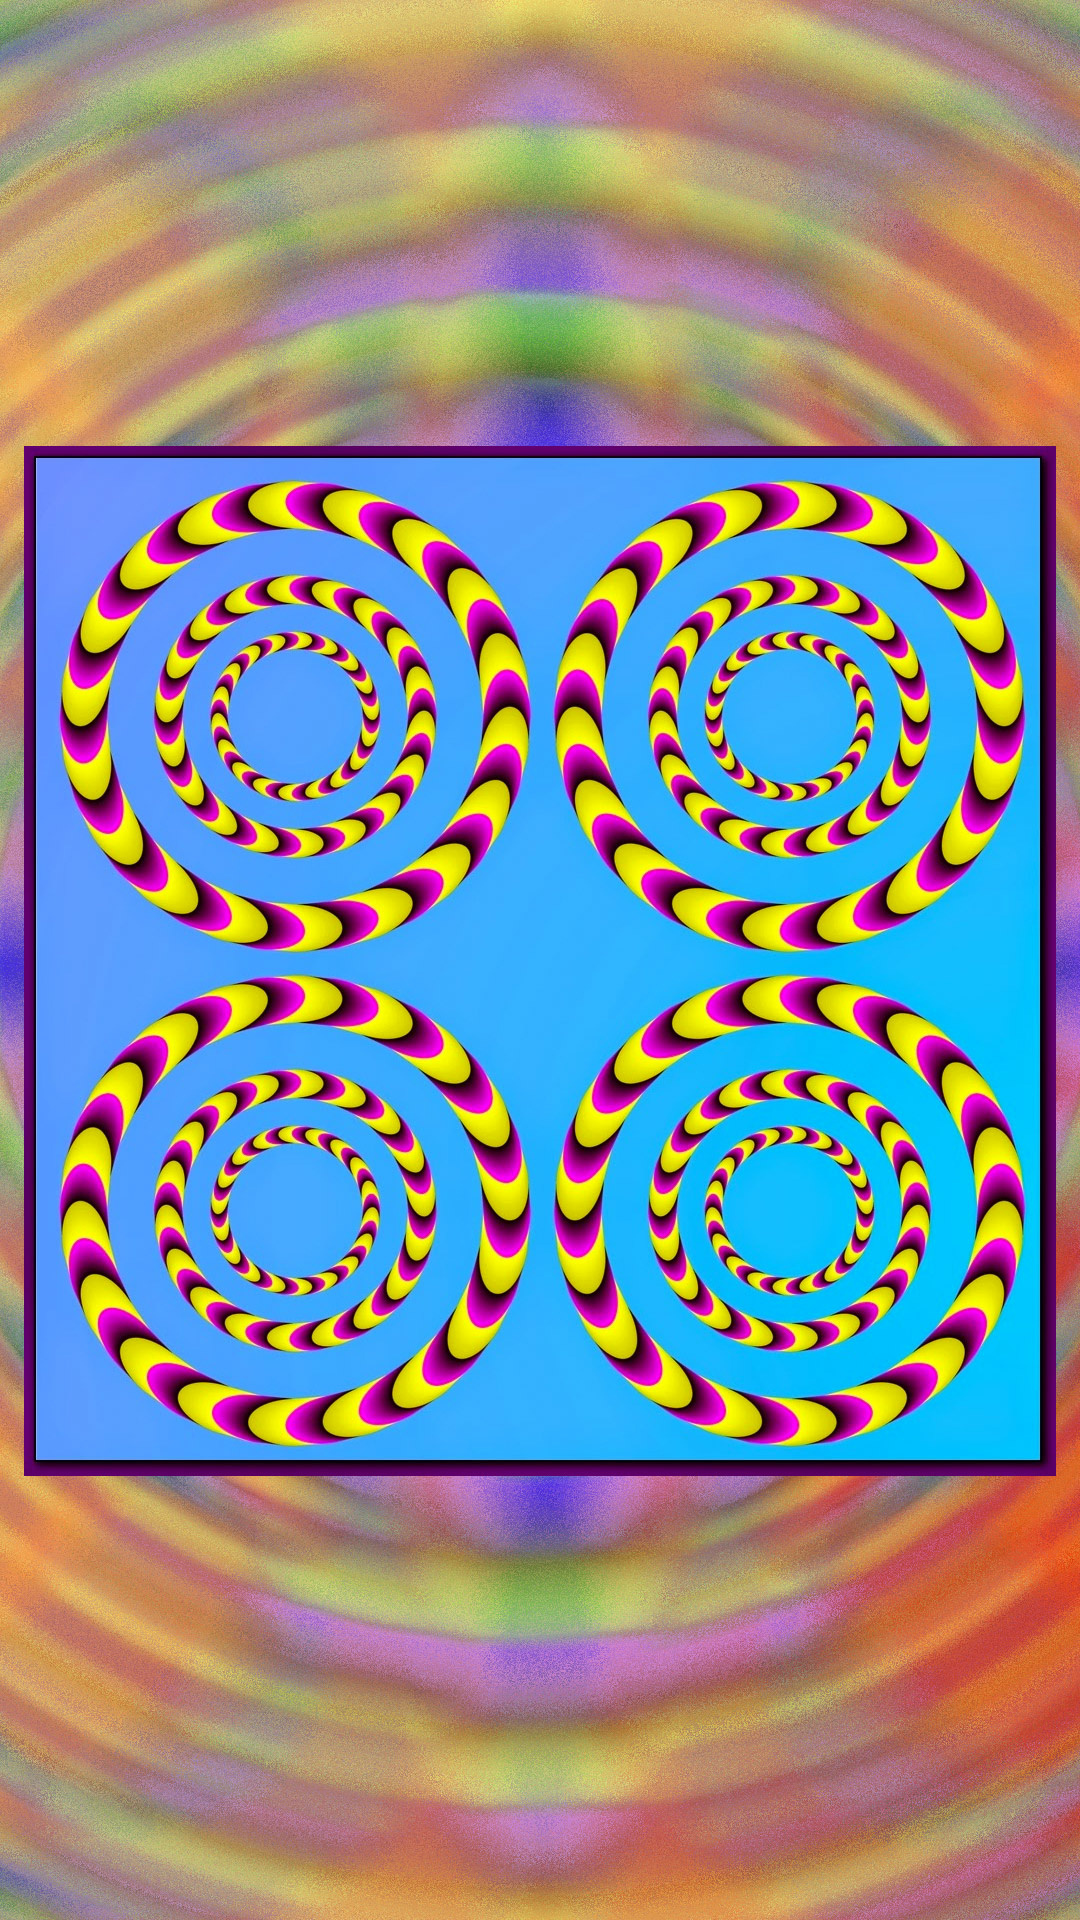 Trippy Optical Illusions That Appear to be Animated Use as Phone Wallpaper if You Want to go Crazy BOOOOOOOM! CREATE * INSPIRE * COMMUNITY * ART * DESIGN * MUSIC * FILM * PHOTO * PROJECTS 1080x1920